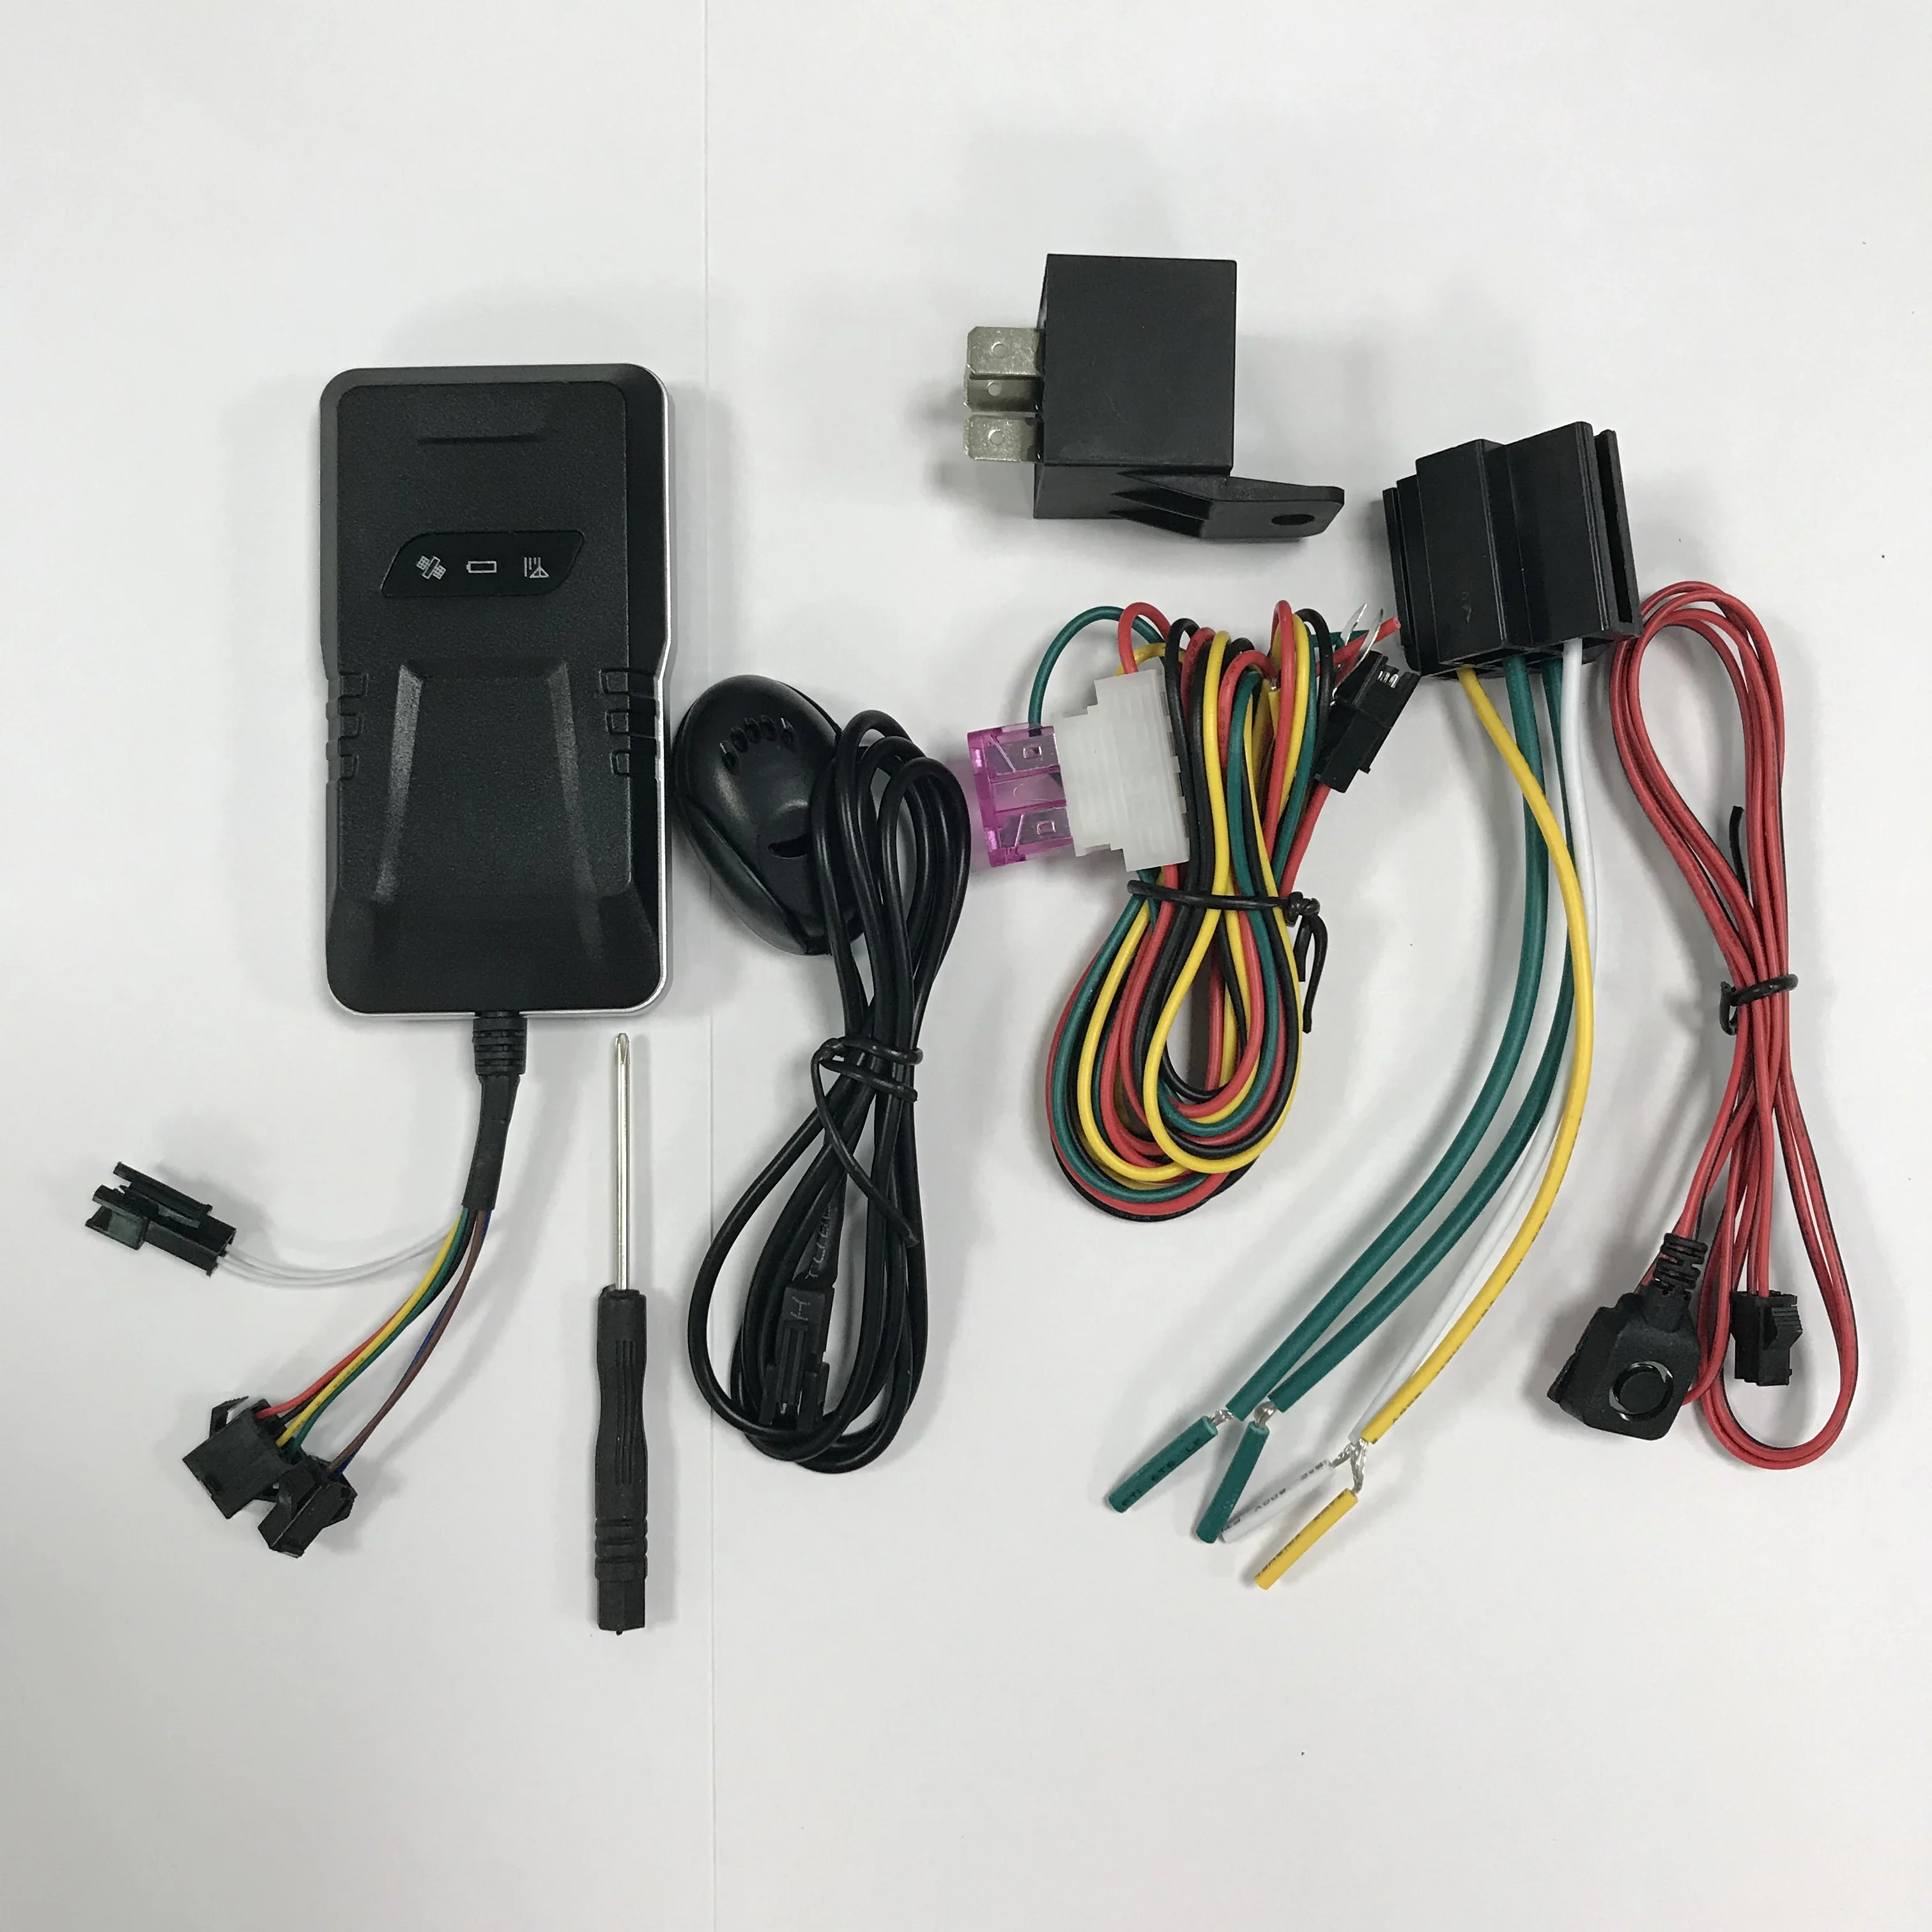 New arrival Waterproof IP65 GSM GPS Tracker with SOS Microphone